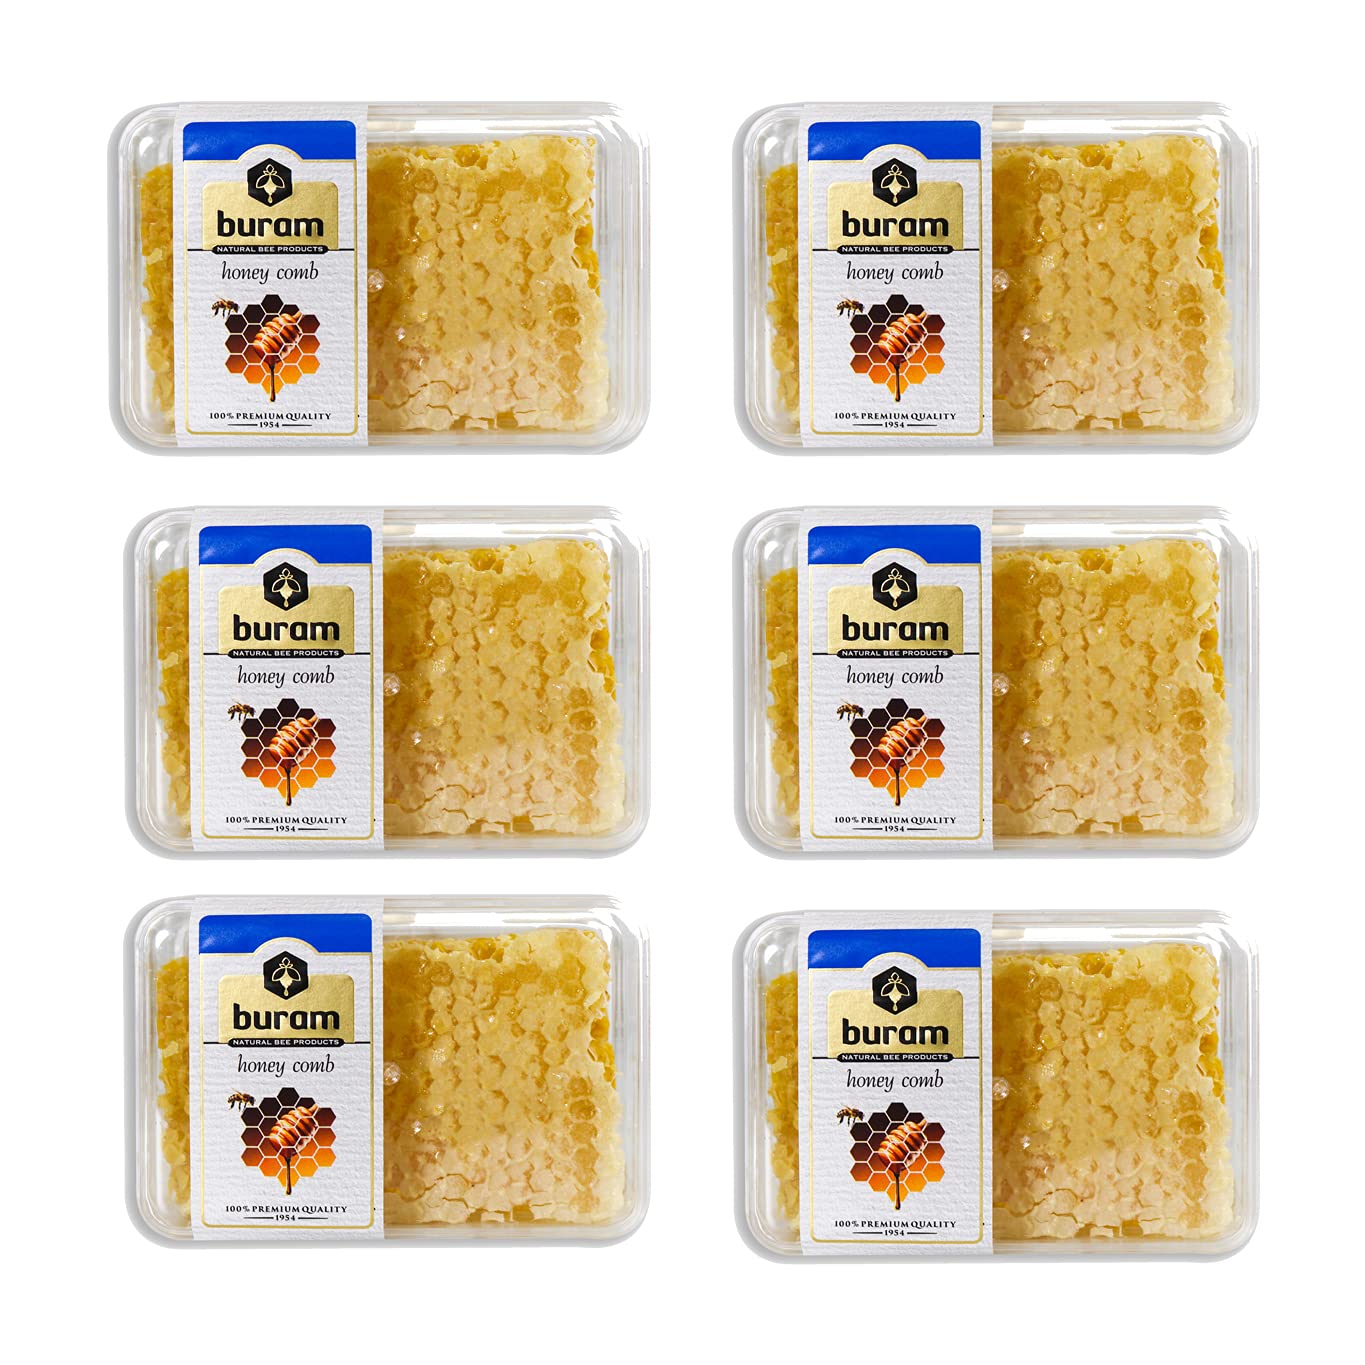 Buram Pure Gourmet Raw Honeycomb-100% All-Natural, No Additives, No Preservatives, From the Turkish Mountains 7.1 oz Pack of 6